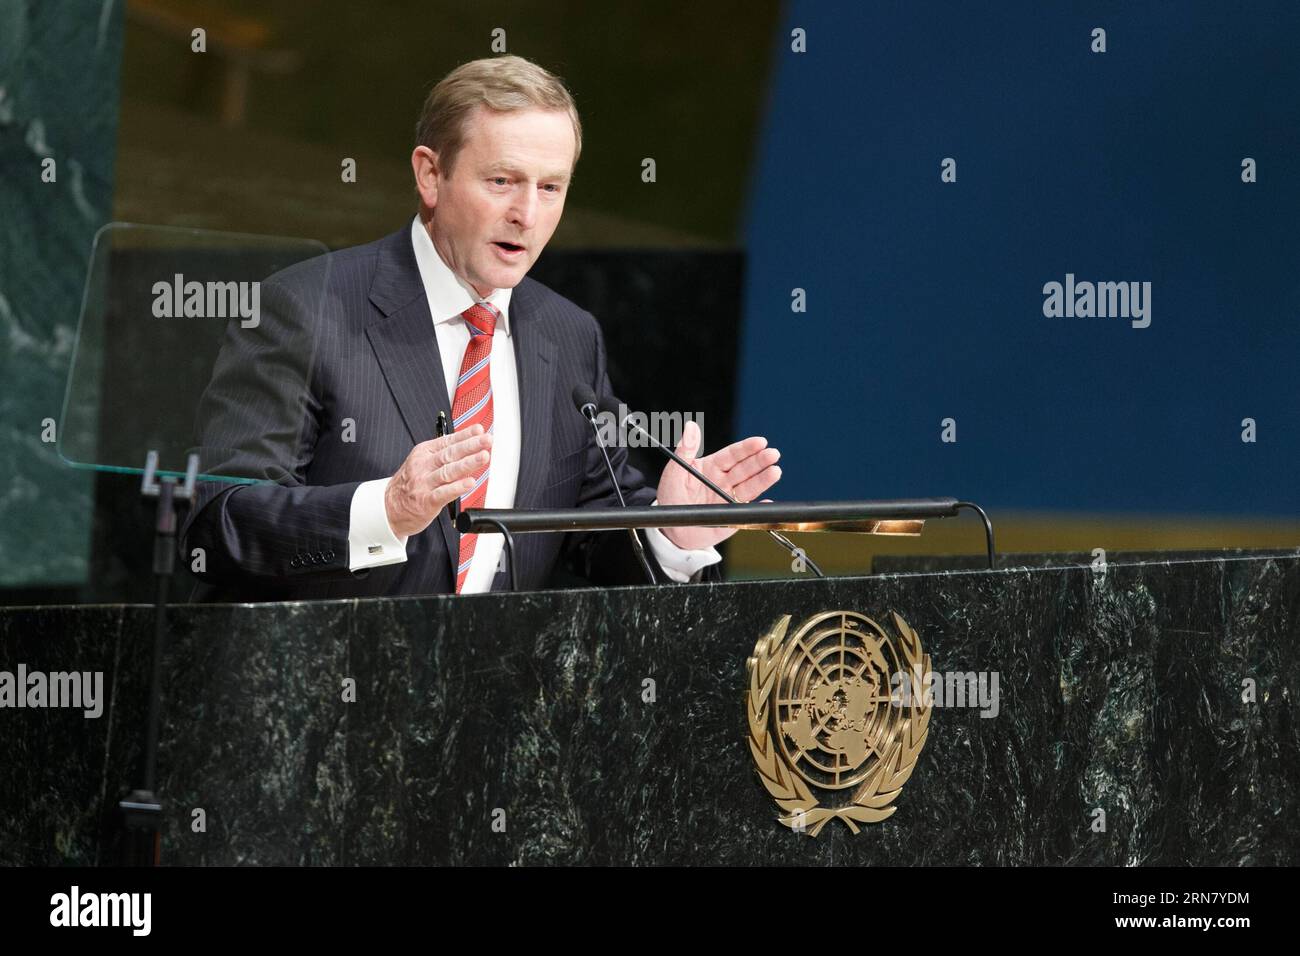 (150925) -- NEW YORK, Sept. 25, 2015 -- Irish Prime minister Enda Kenny addresses the Sustainable Development Summit at United Nations headquarters in New York, Sept. 25, 2015. A momentous sustainable development agenda, which charts a new era of sustainable development until 2030, was adopted on Friday by 193 UN member states at the UN Sustainable Development Summit at the UN headquarters in New York. ) UN-NEW YORK-SUSTAINABLE DEVELOPMENT SUMMIT-AGENDA-ADOPTED LixMuzi PUBLICATIONxNOTxINxCHN   New York Sept 25 2015 Irish Prime Ministers Enda Kenny addresses The Sustainable Development Summit A Stock Photo